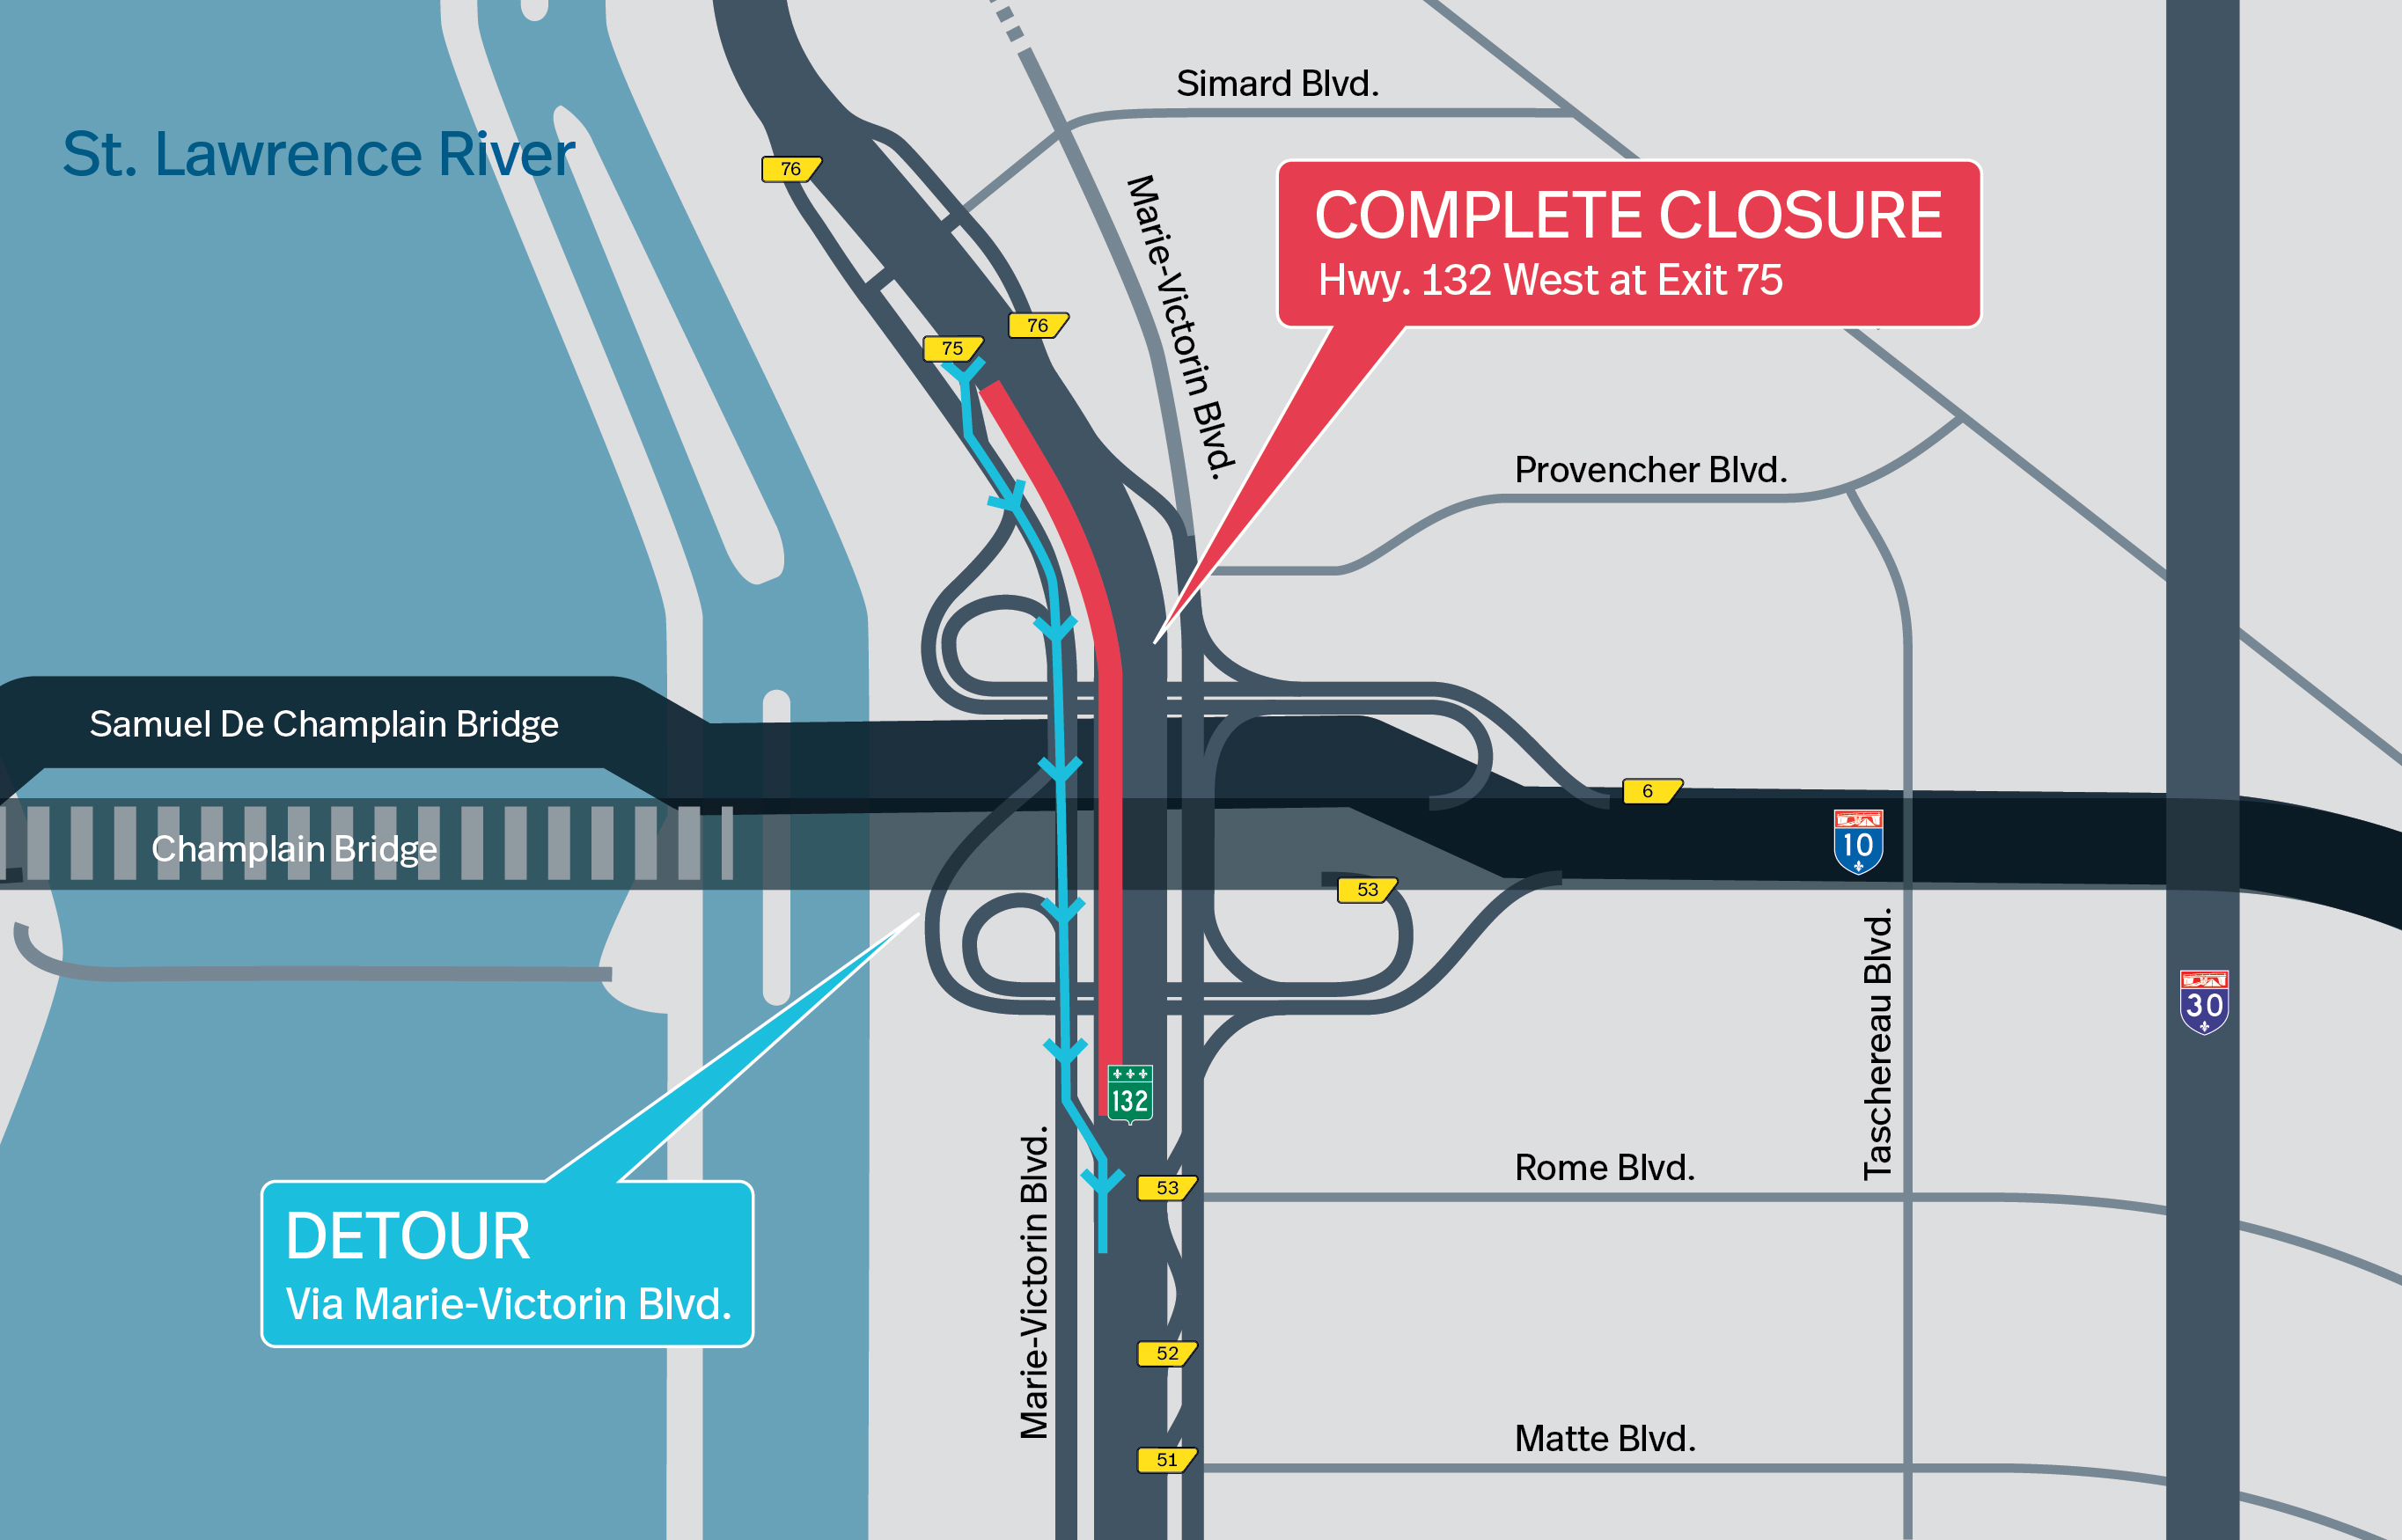 Brossard Sector | Complete night closure of Hwy. 132 West, under the original Champlain Bridge, on April 19